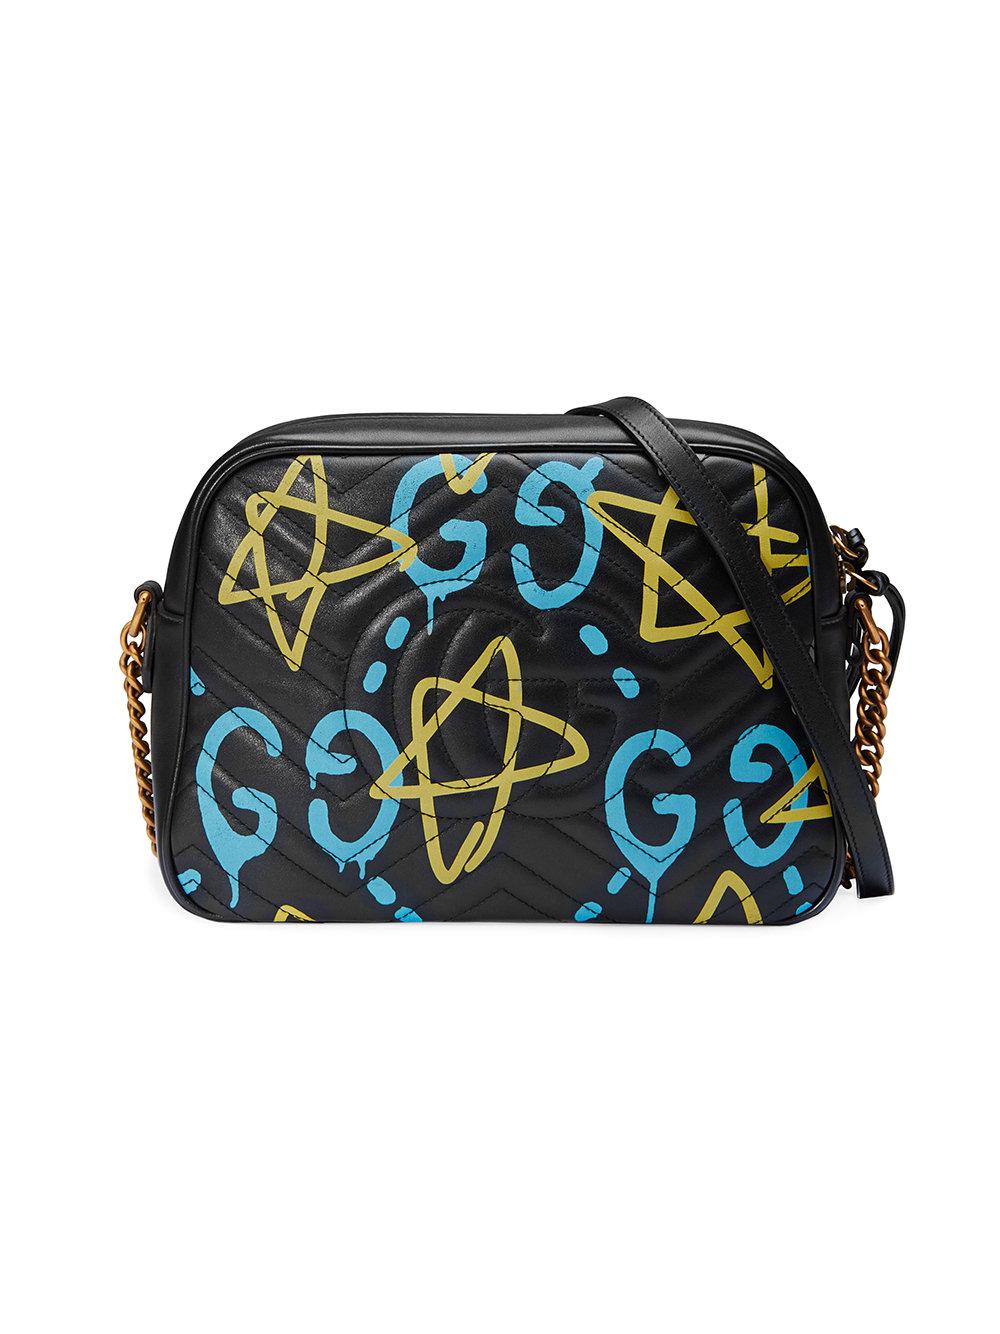 Gucci Ghost GG Marmont Graffiti-Print Leather Shoulder Bag in Black | Lyst